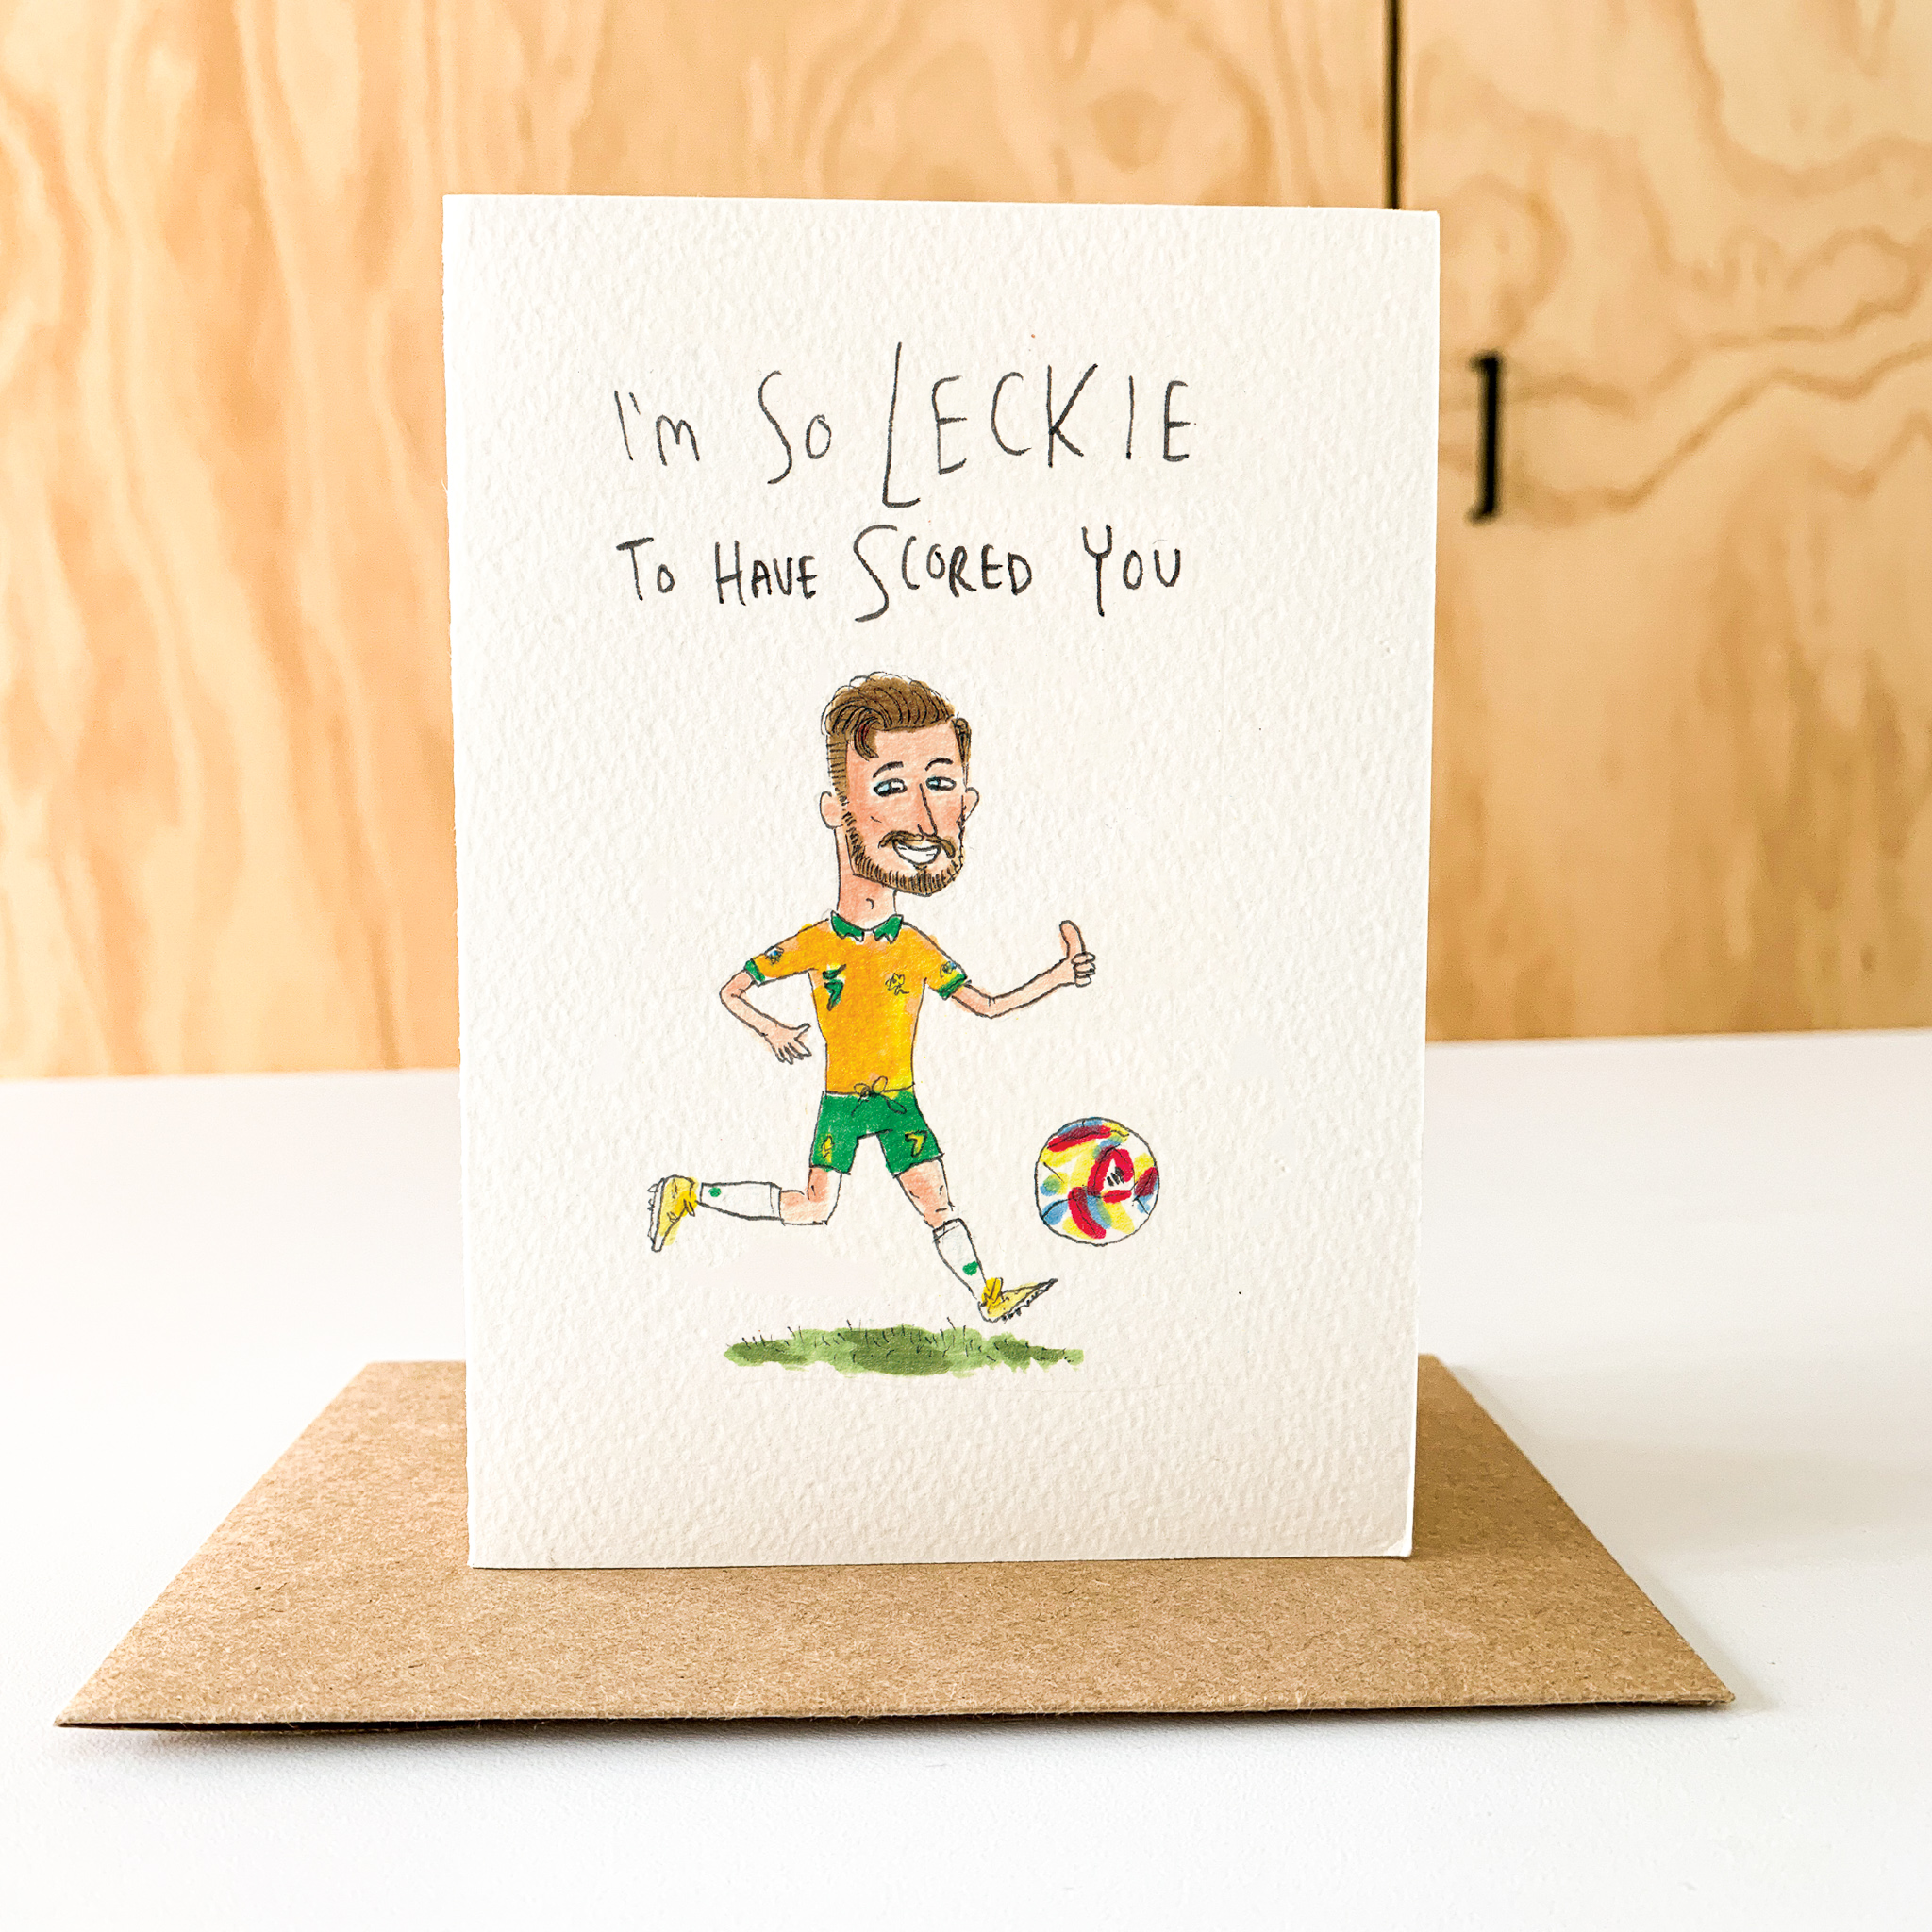 I'm So Leckie To Have Scored You - Football fans